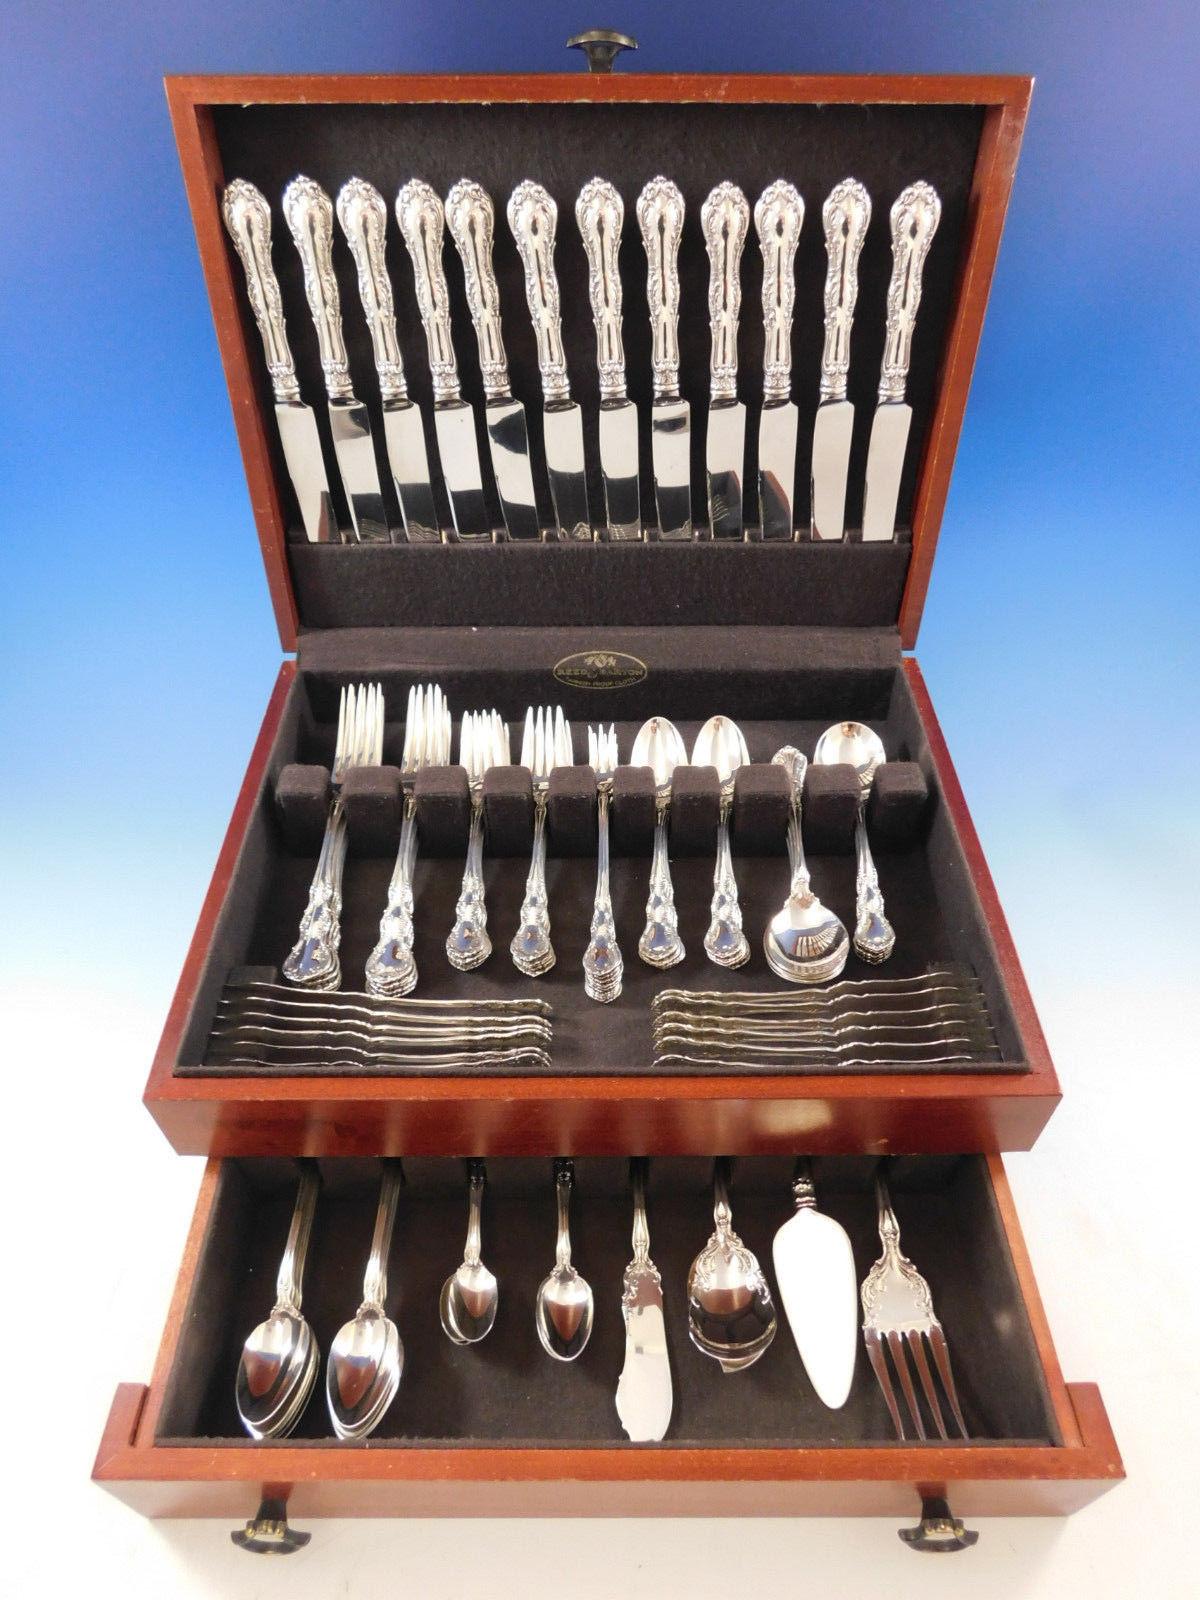 Monumental dinner size old Atlanta by Wallace sterling silver flatware set, 113 pieces. This set includes:

12 dinner size knives, 9 1/2